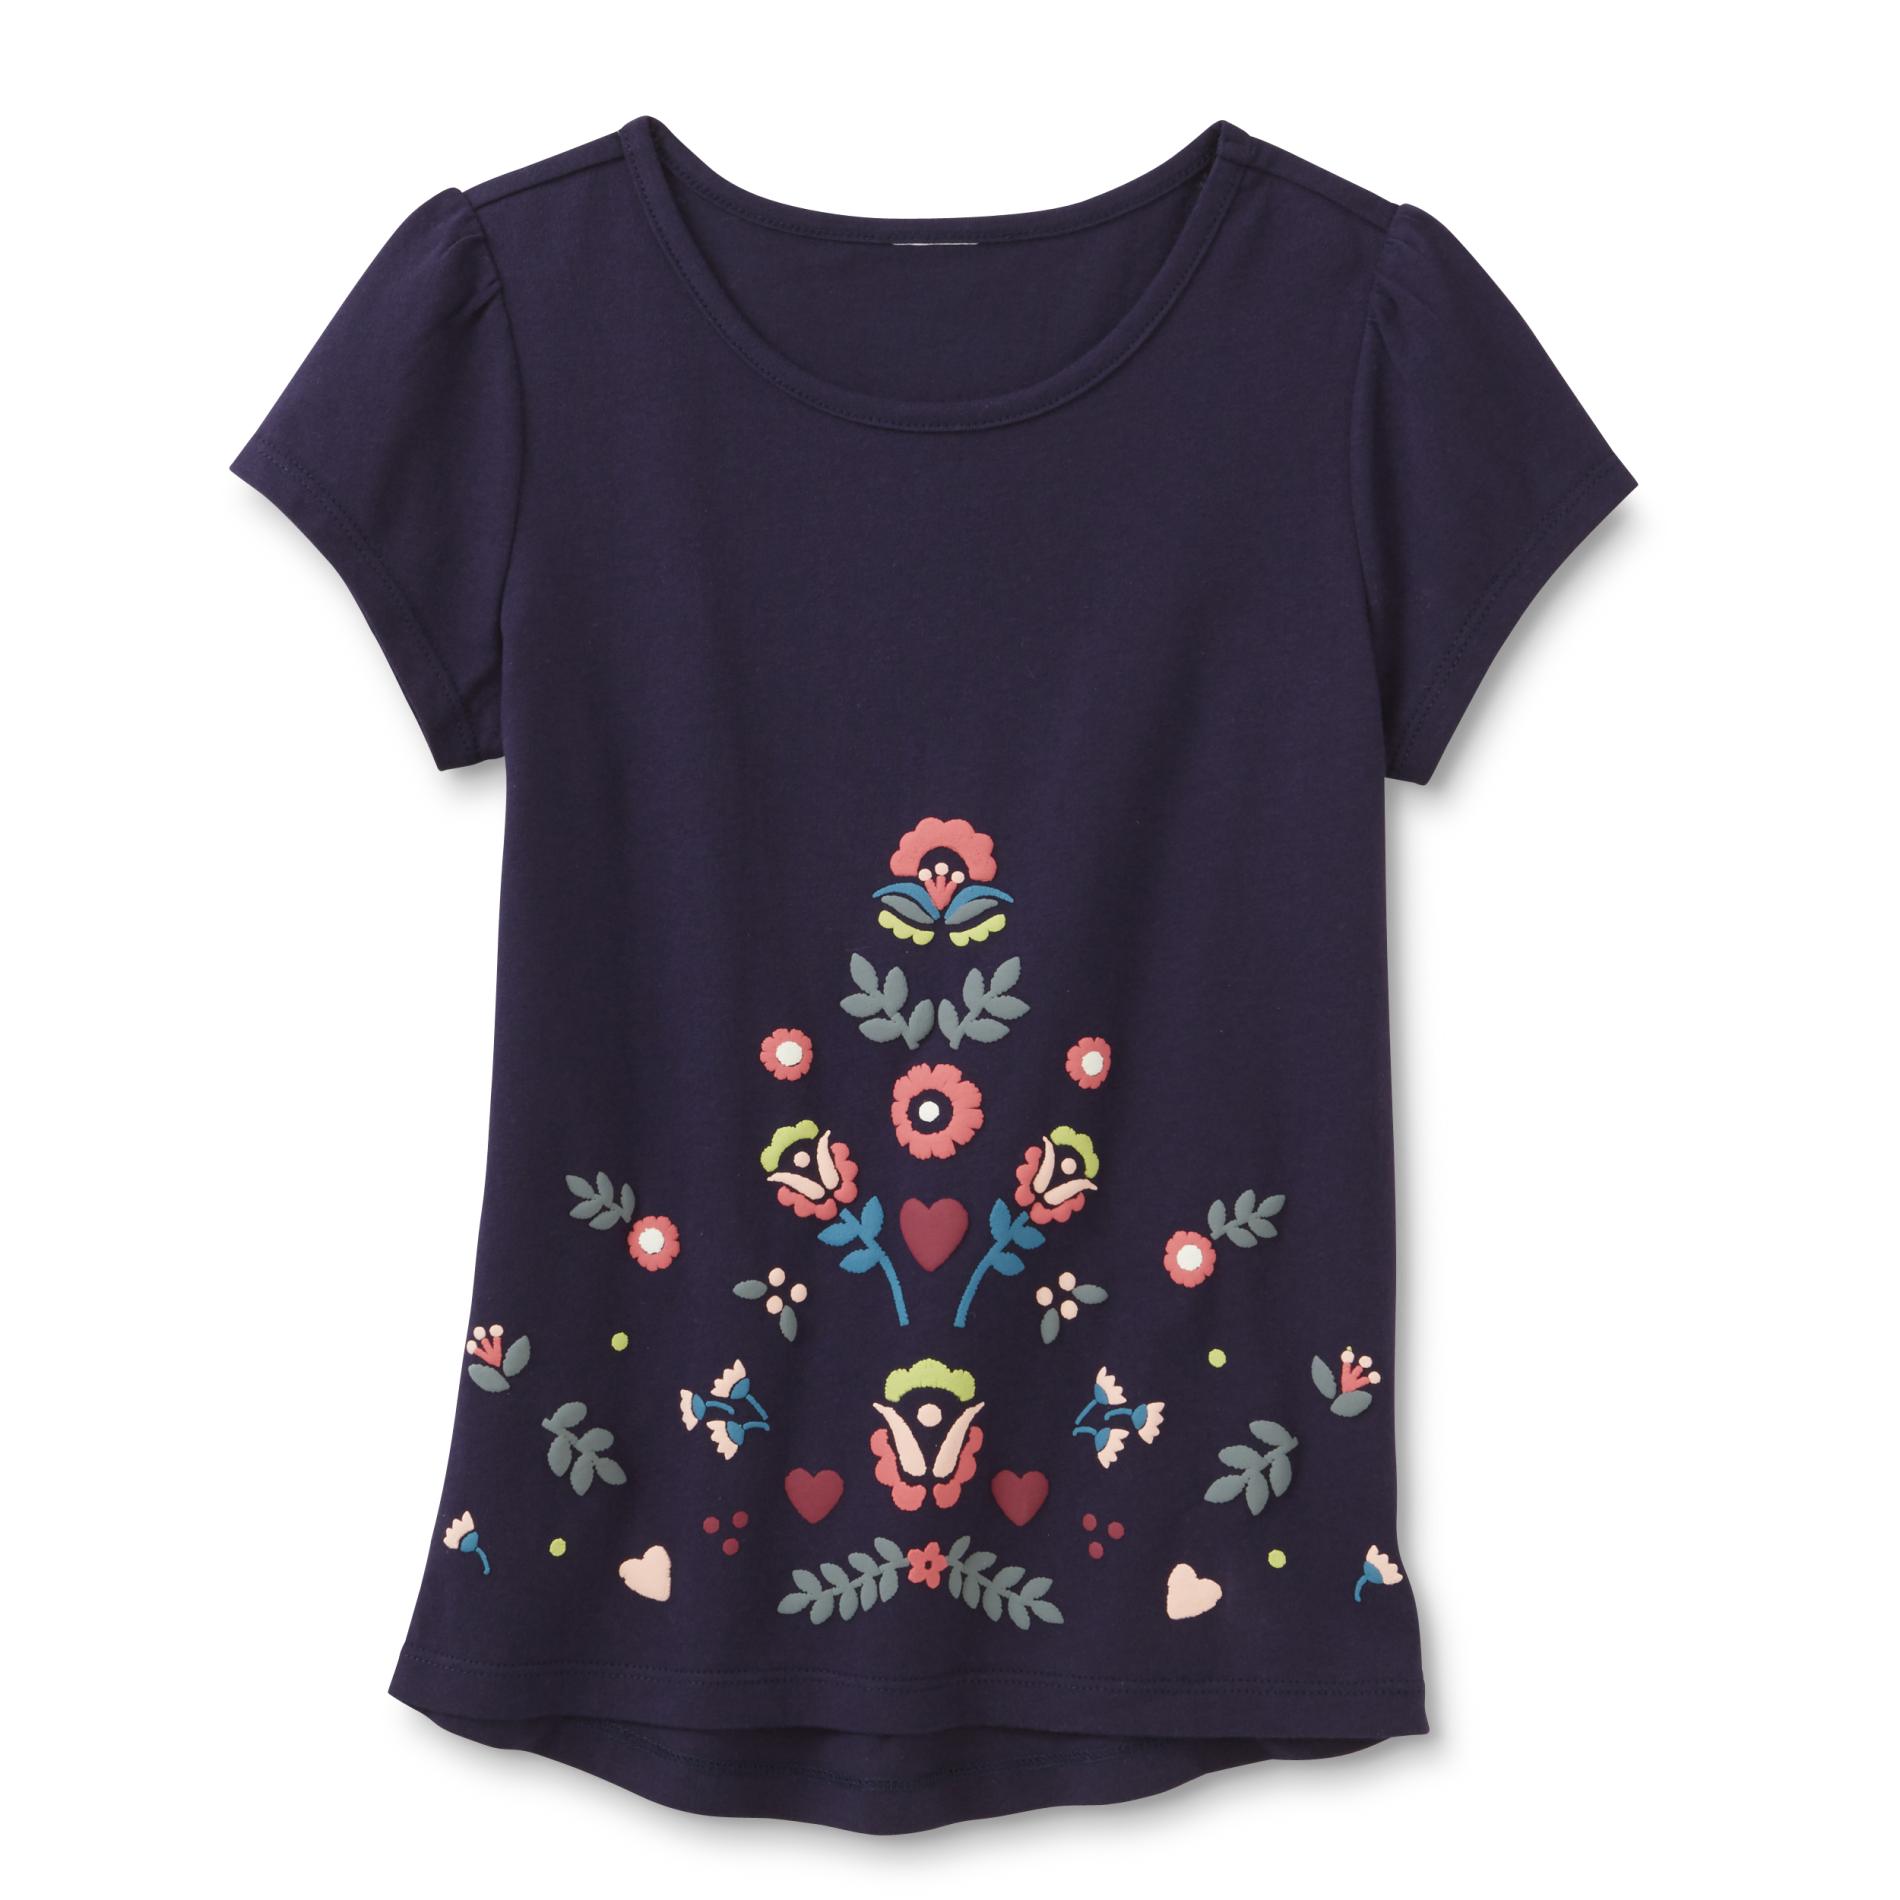 Toughskins Infant & Toddler Girl's Graphic T-Shirt - Floral